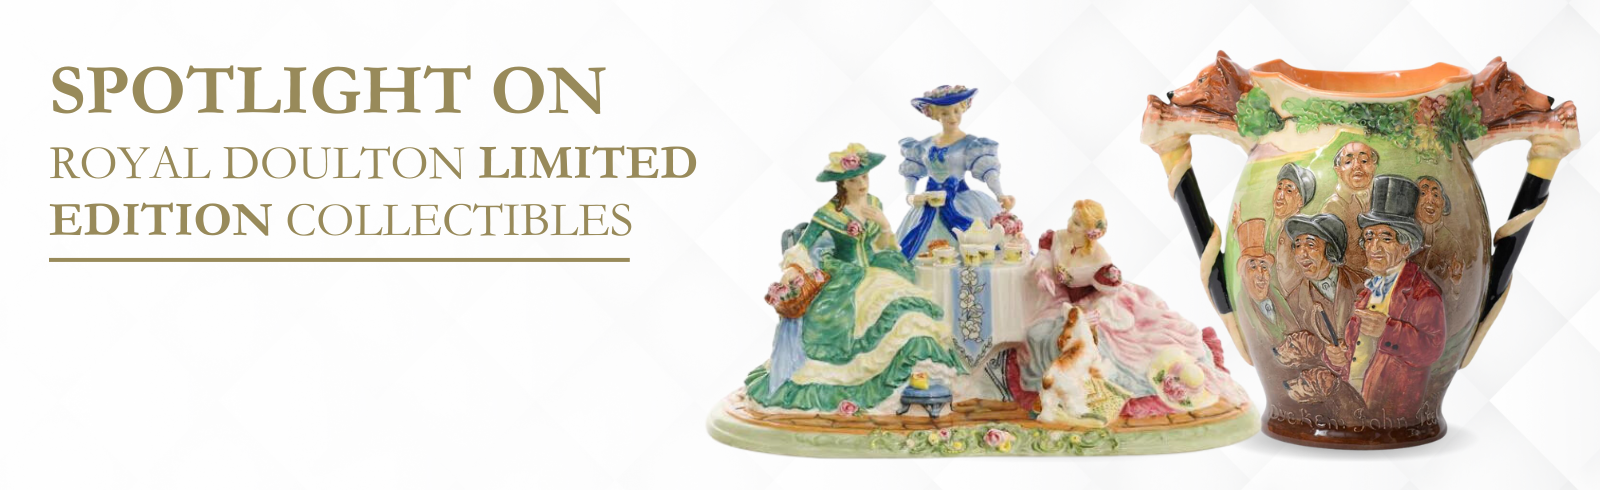 Spotlight on Royal Doulton Limited Edition Collectibles